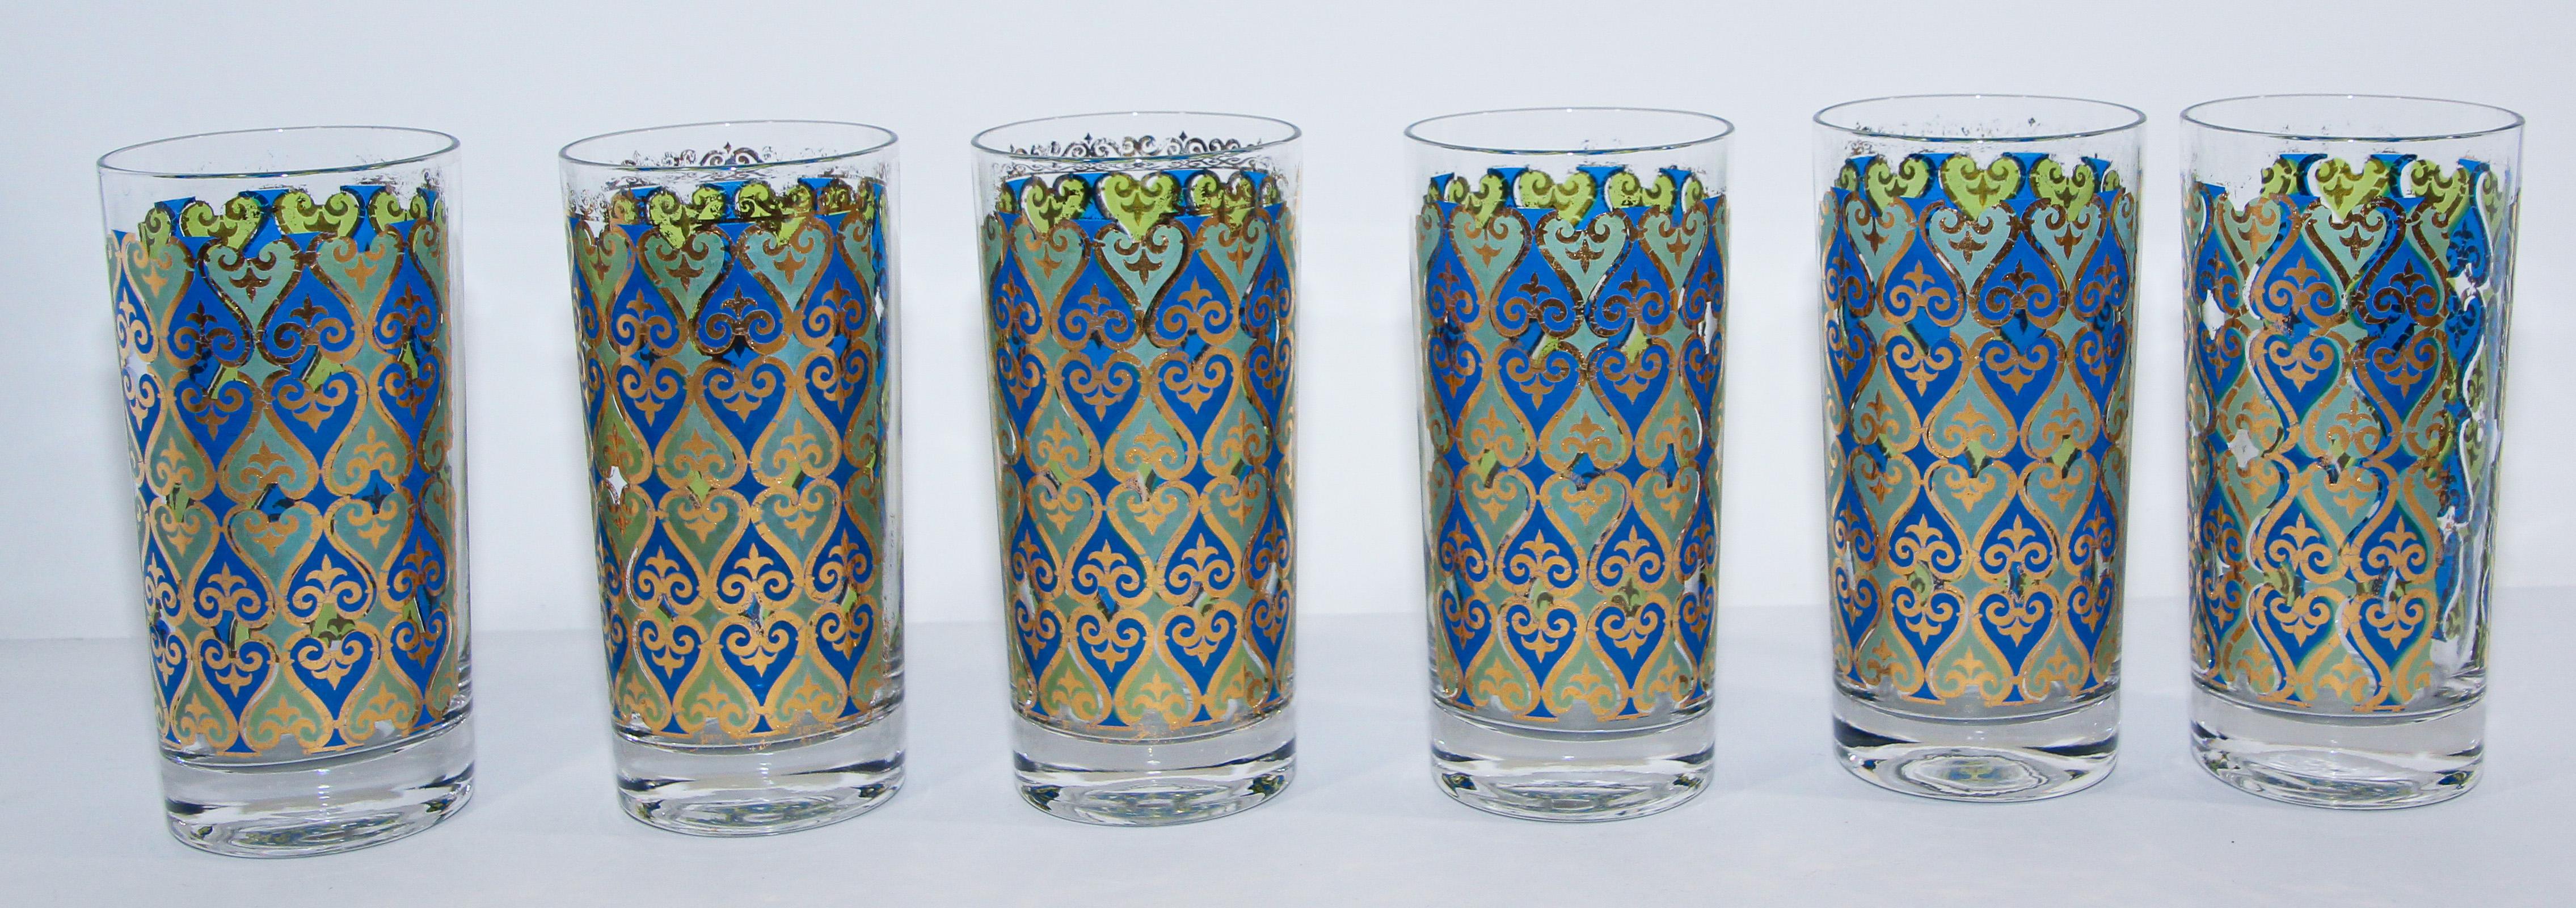 American Vintage Set of 12 Barware Glasses Blue and Gold by Georges Briard